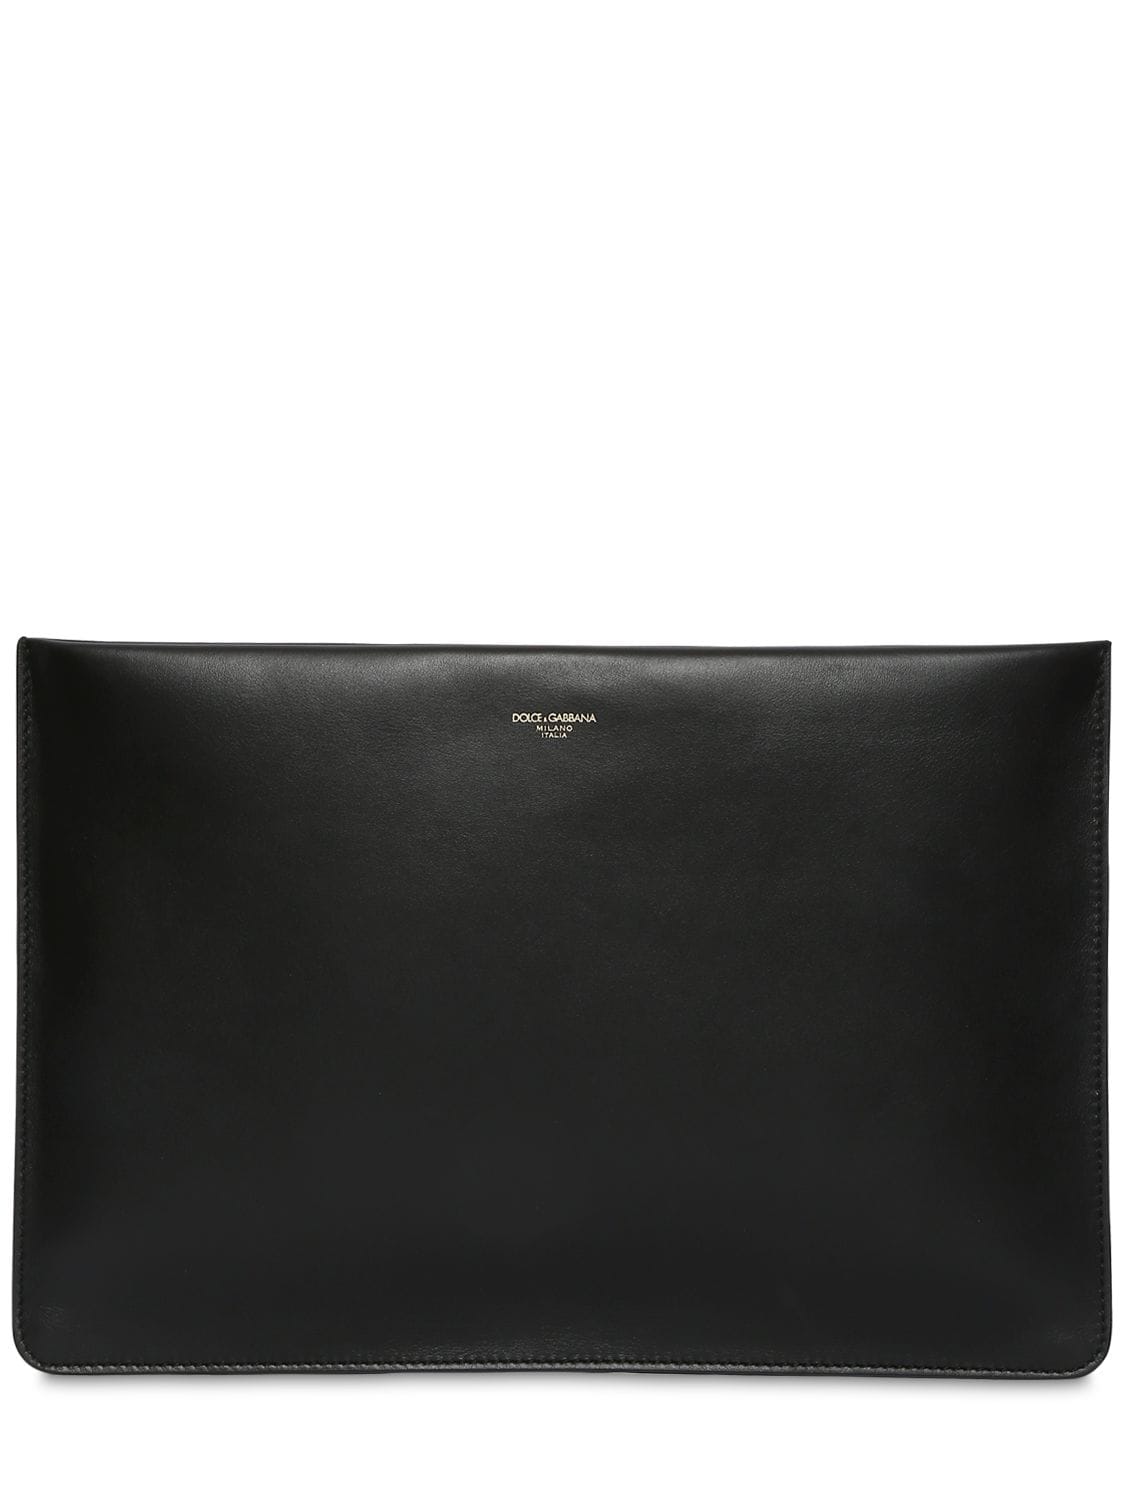 Dolce & Gabbana Logo Leather Pouch In Black